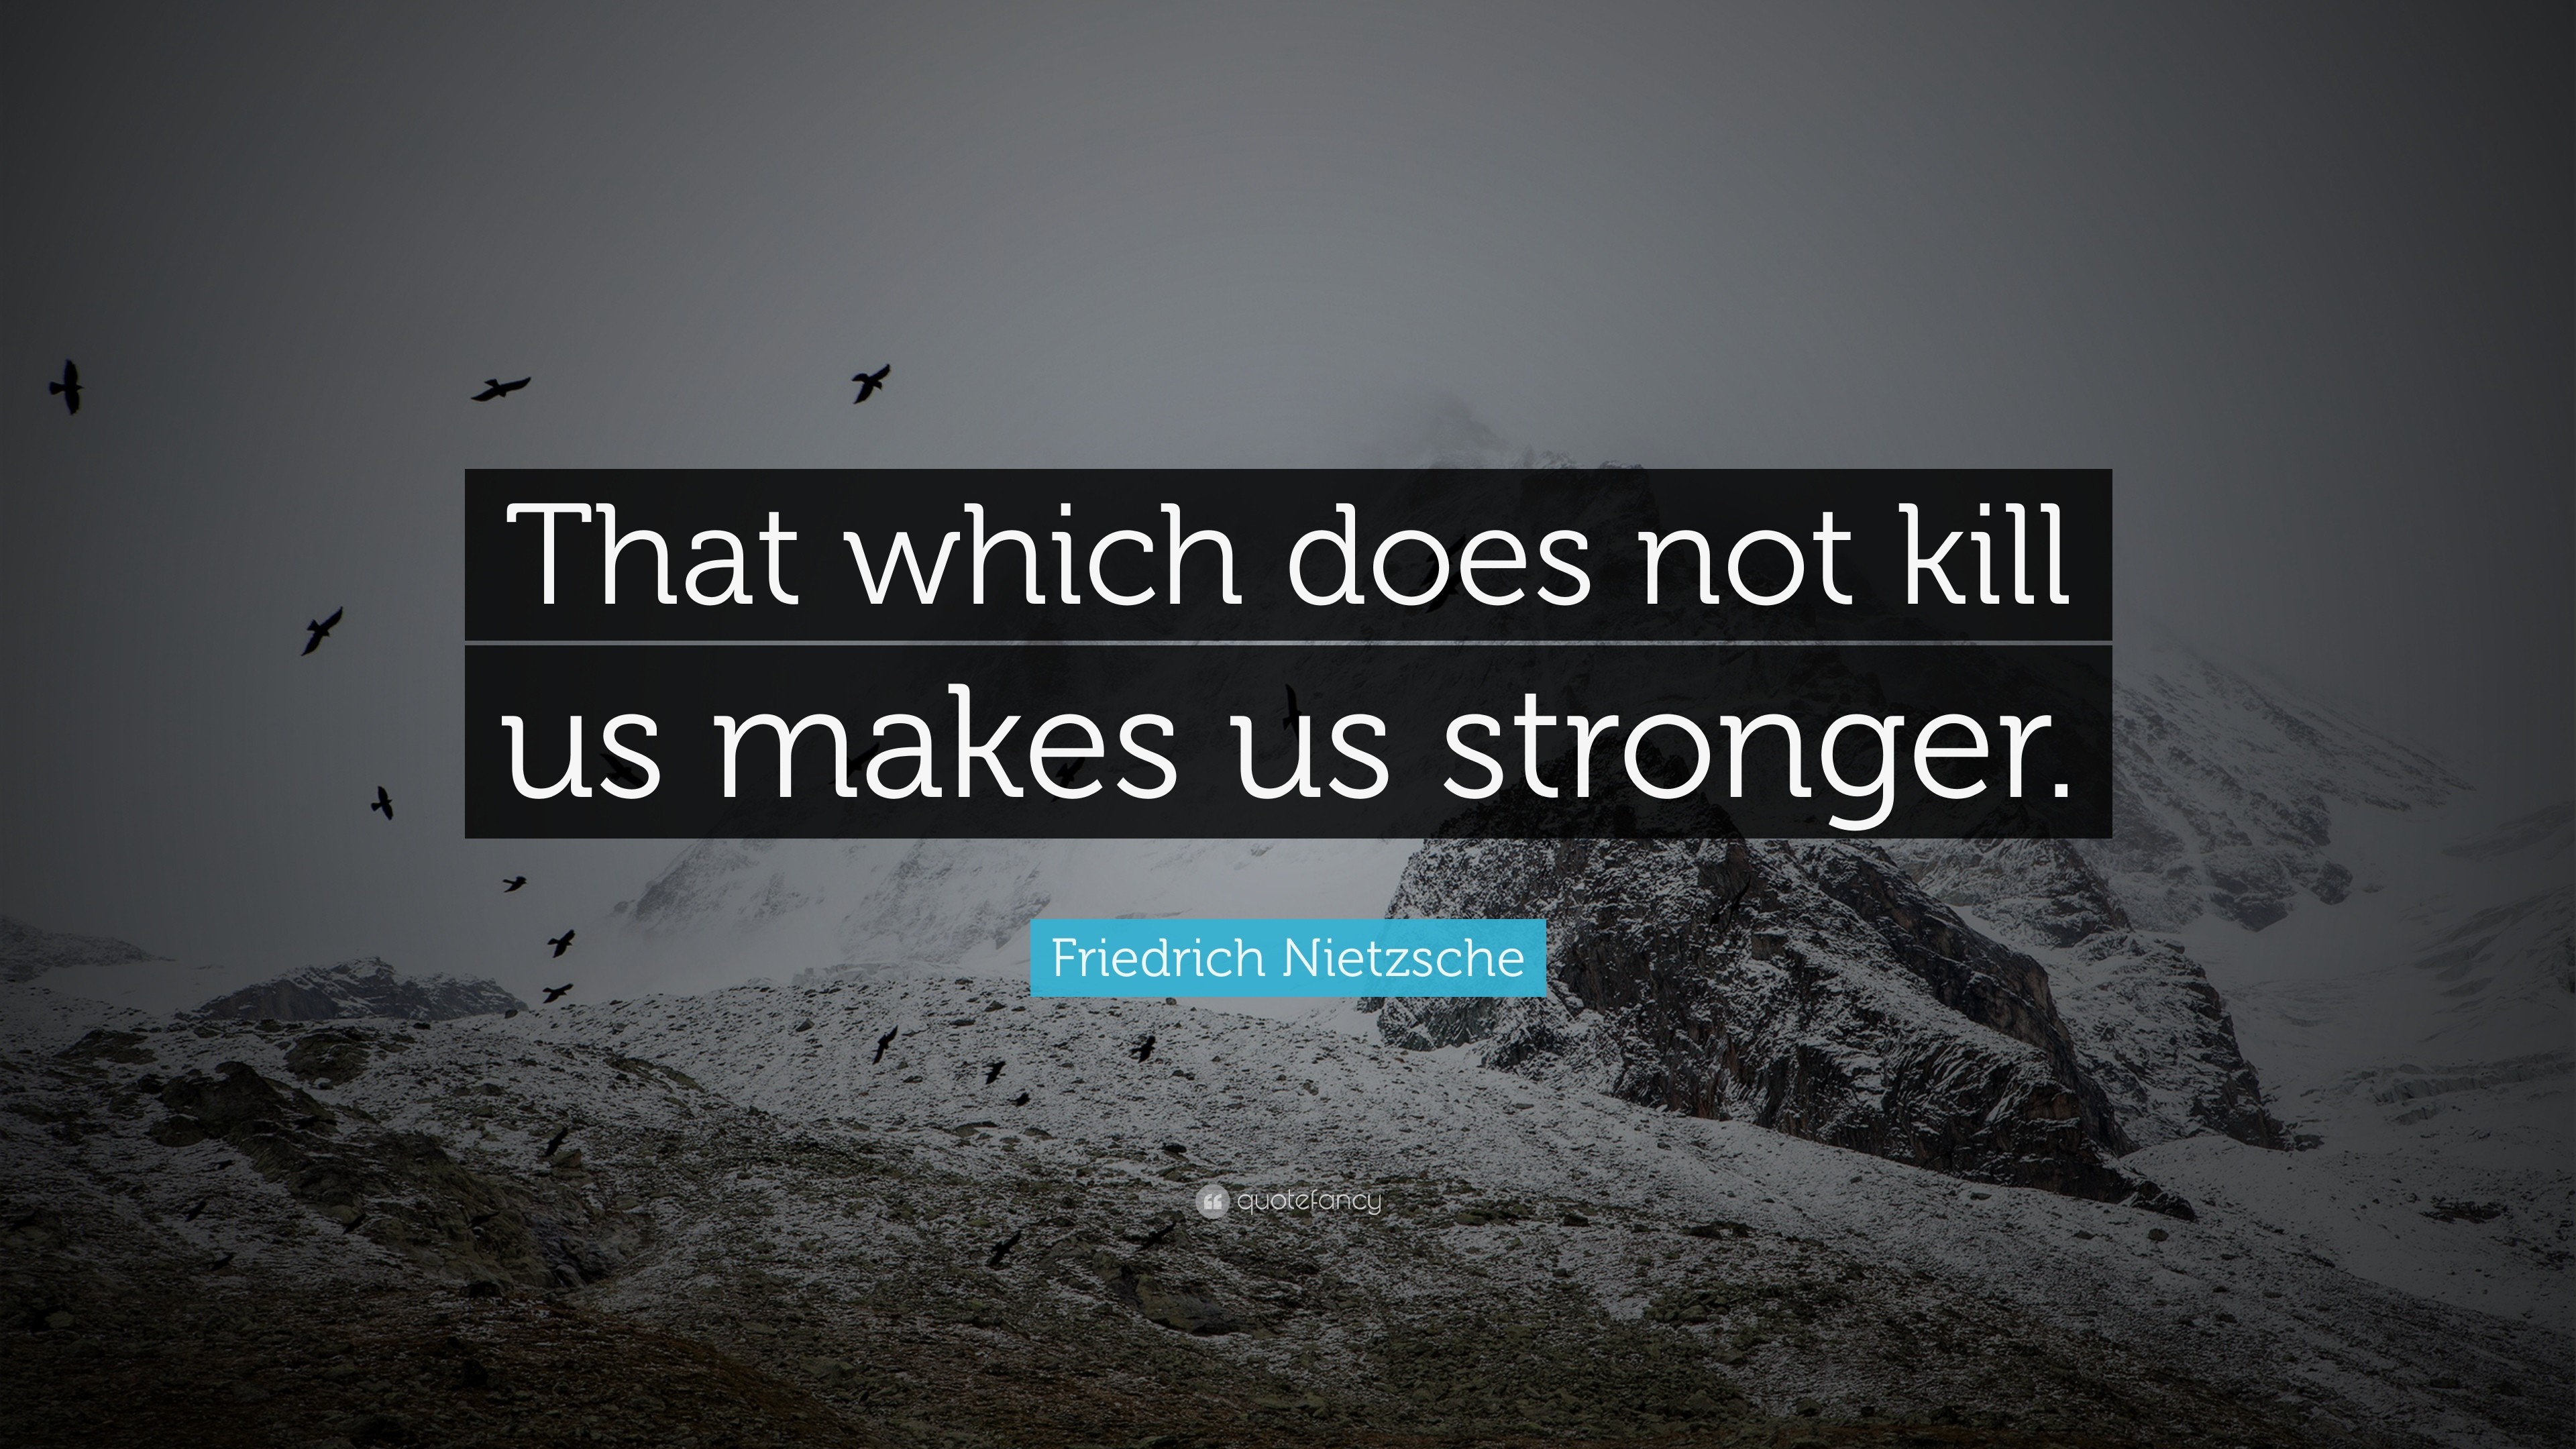 3840x2160 Positive Quotes: “That which does not kill us makes us stronger.” —